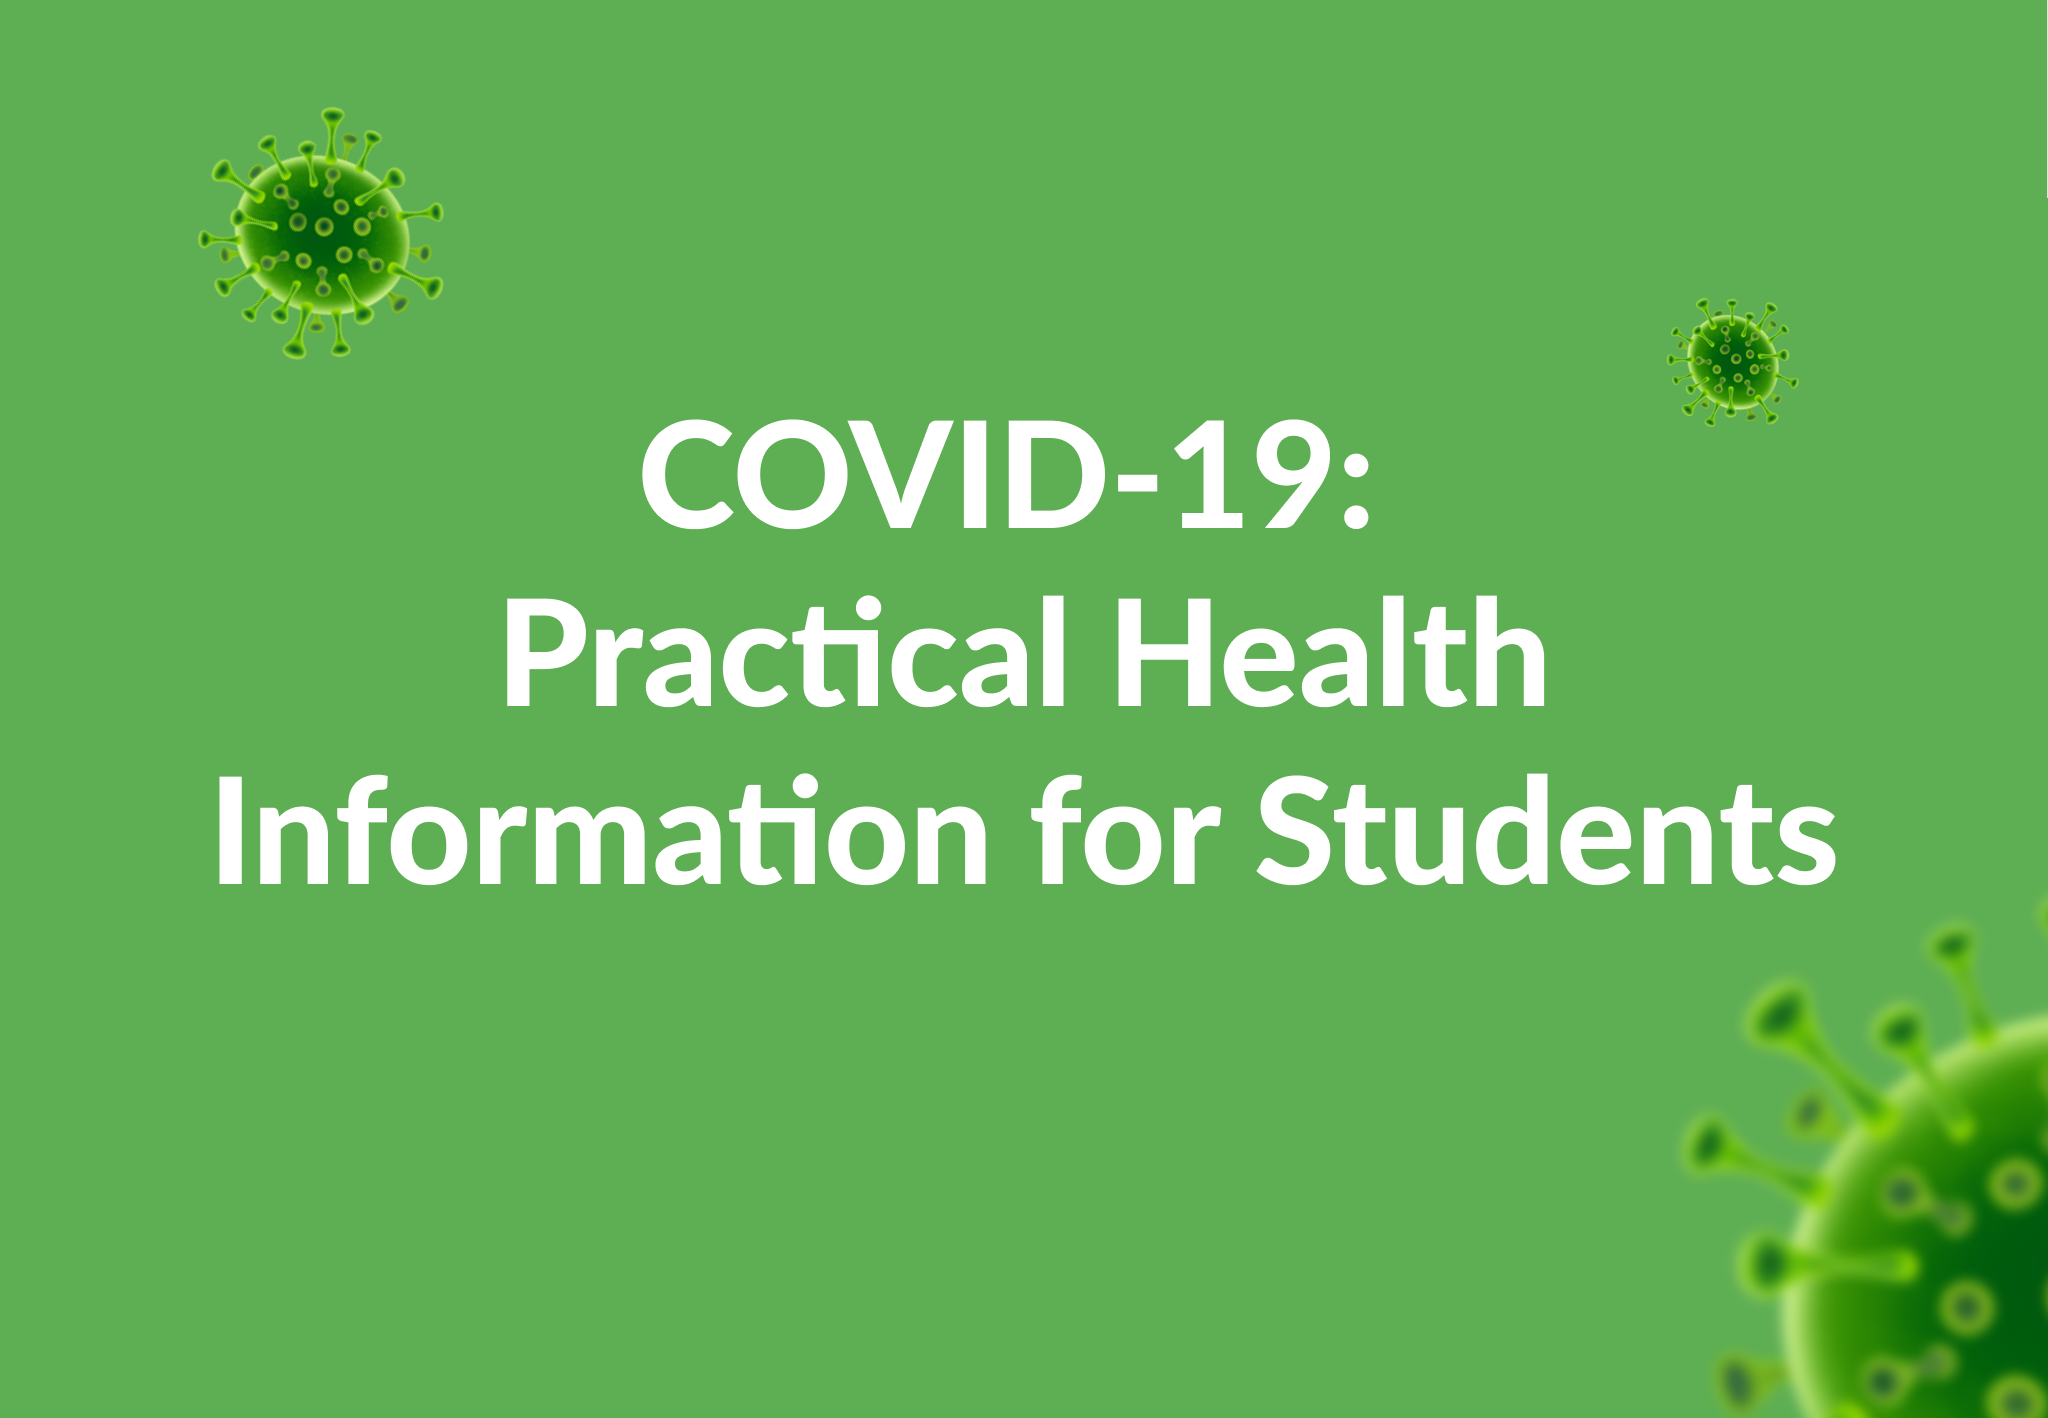 COVID-19: Practical Health Information for Students - European